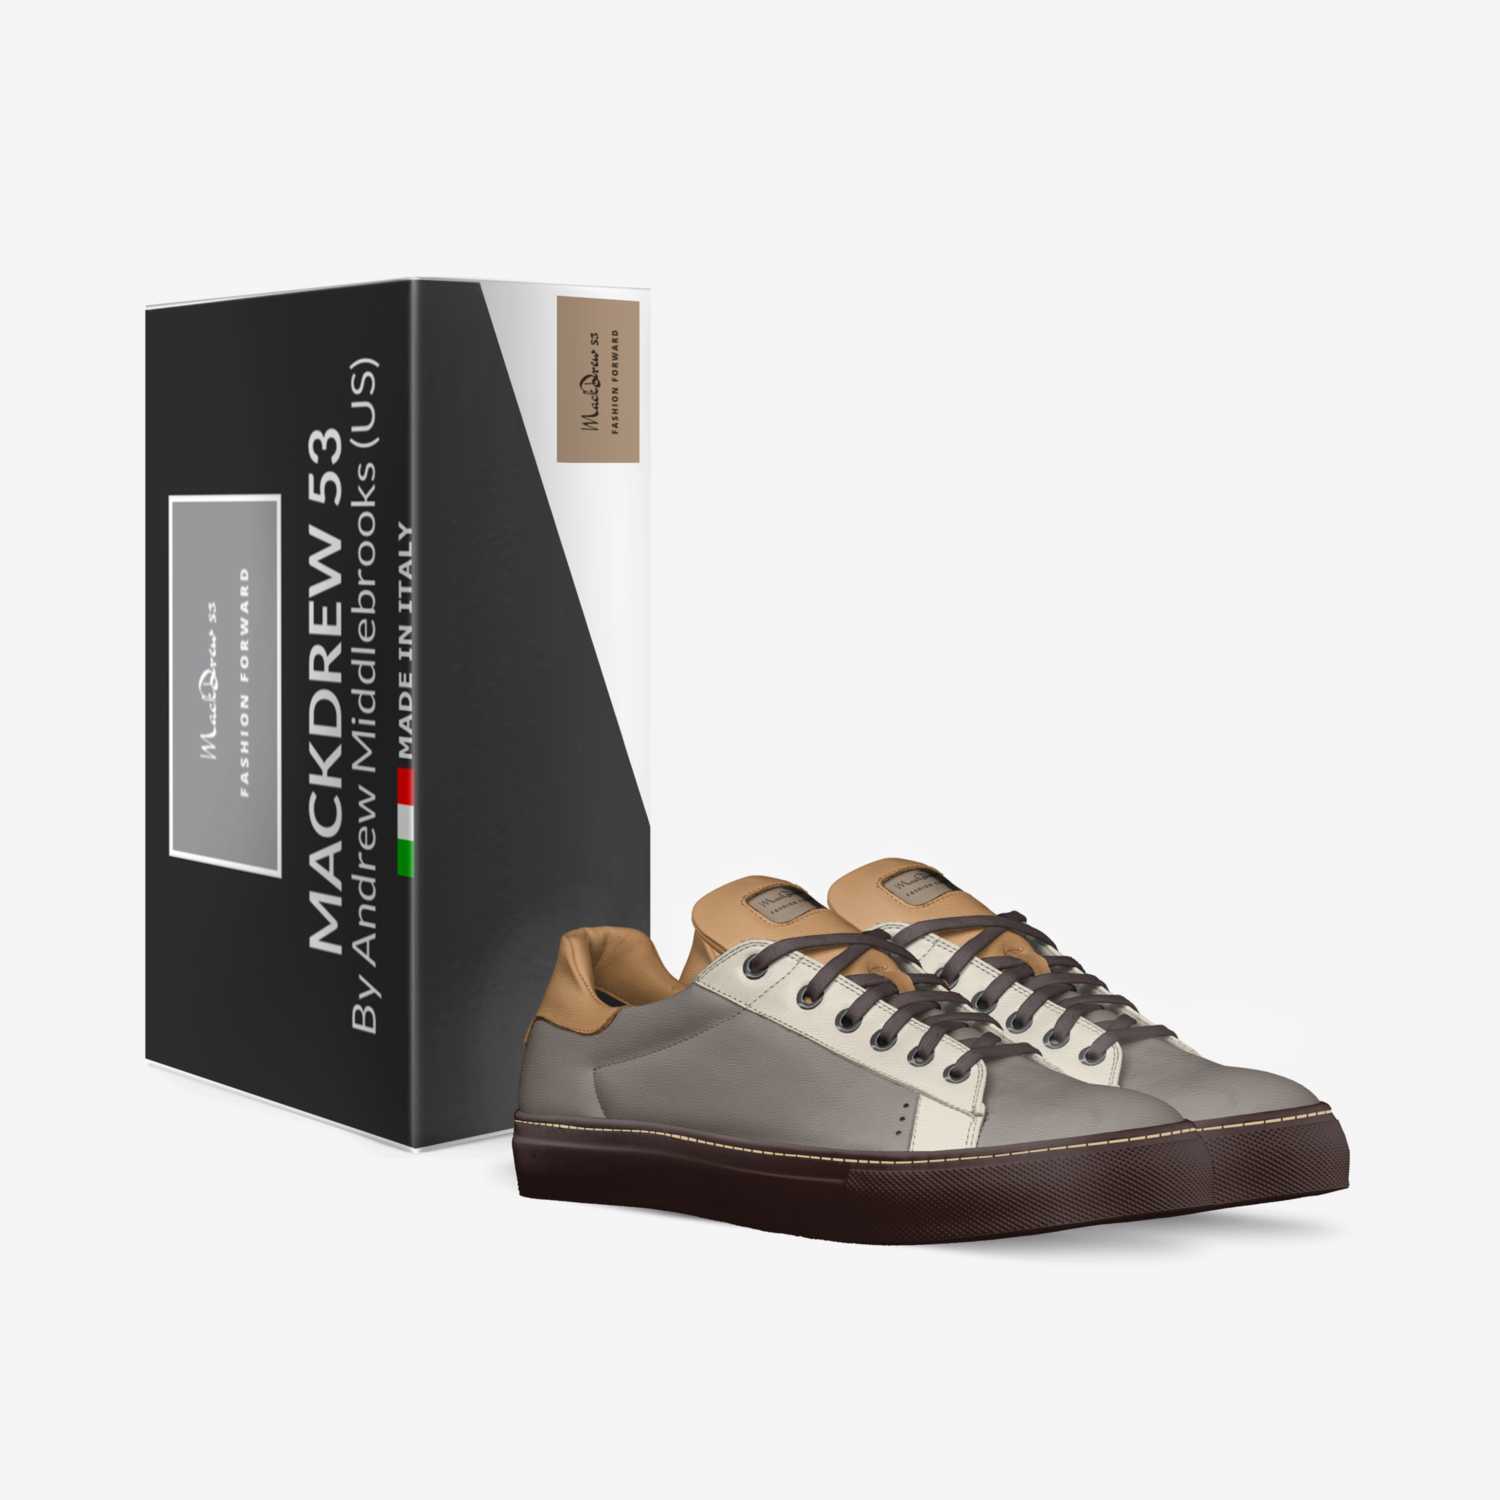 MackDrew 53 custom made in Italy shoes by Andrew Middlebrooks | Box view